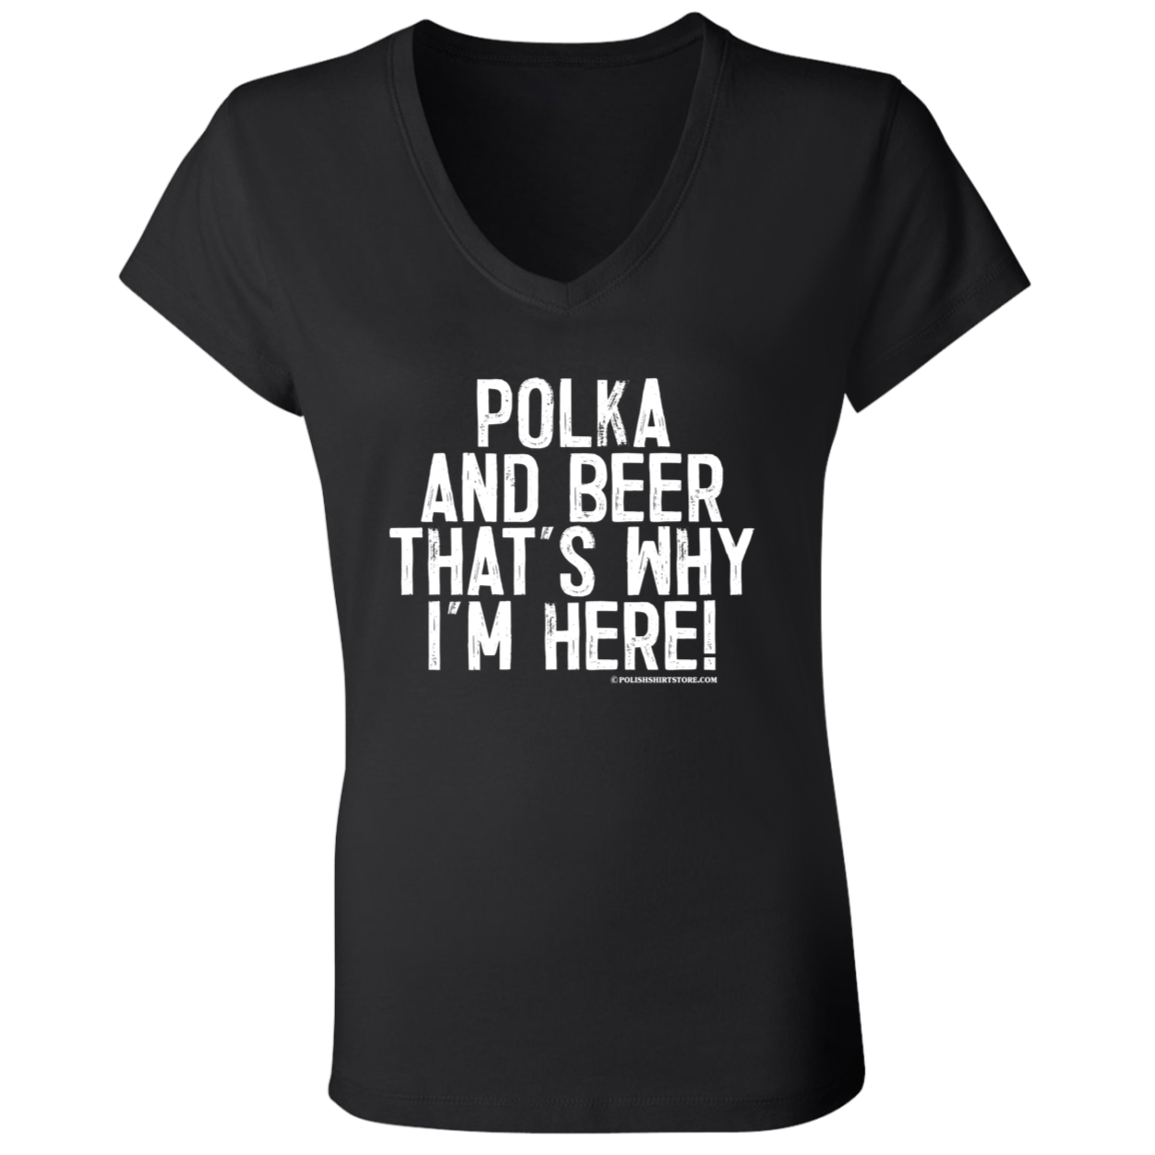 Polka and Beer That's Why I'm Here Apparel CustomCat B6005 Ladies' Jersey V-Neck T-Shirt Black S